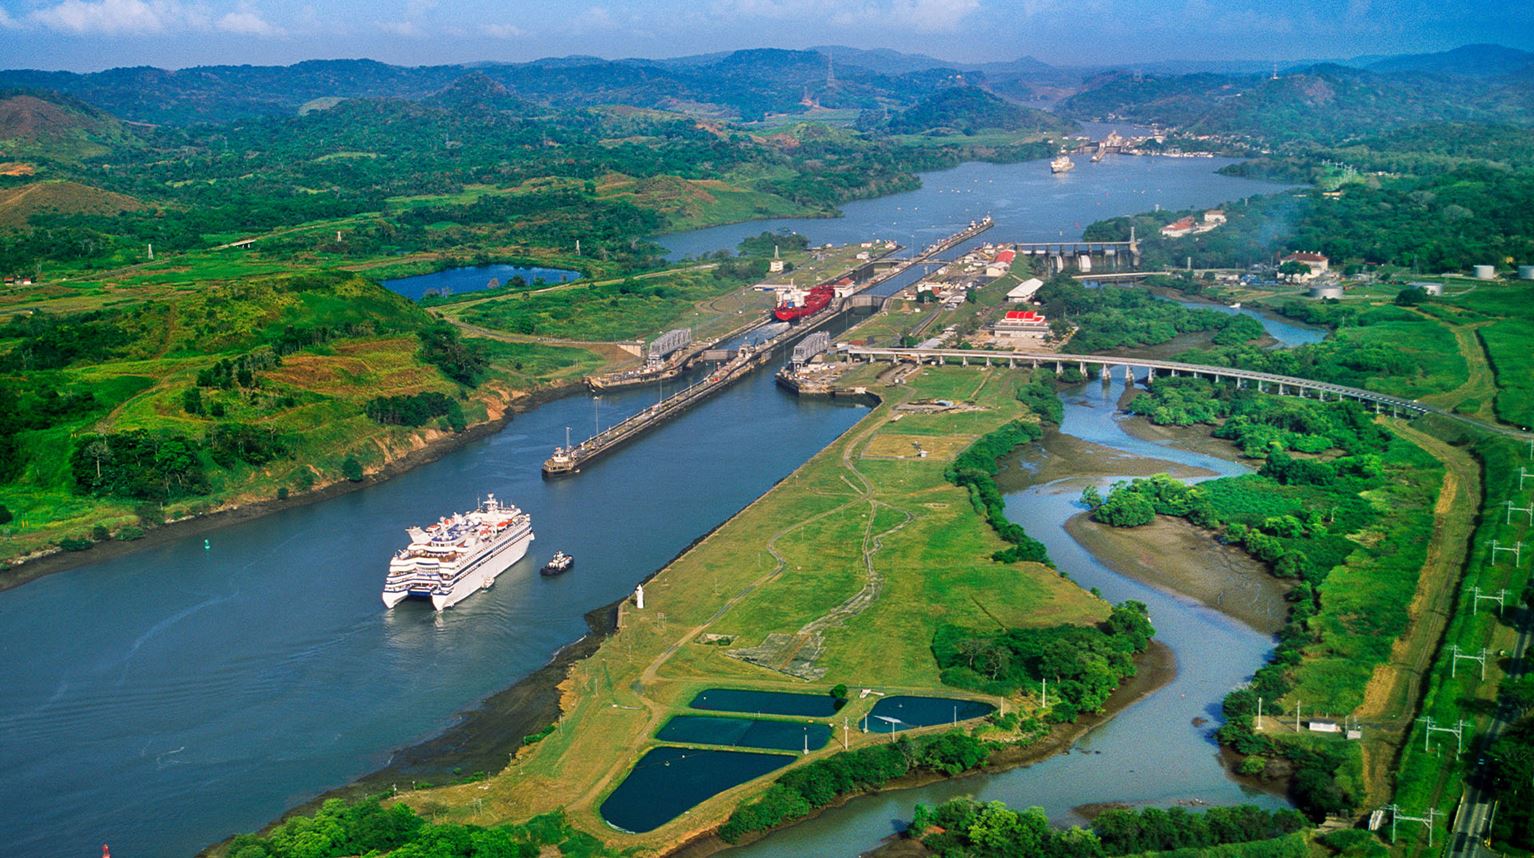 Aerial view of cruise ship on river in green landscape